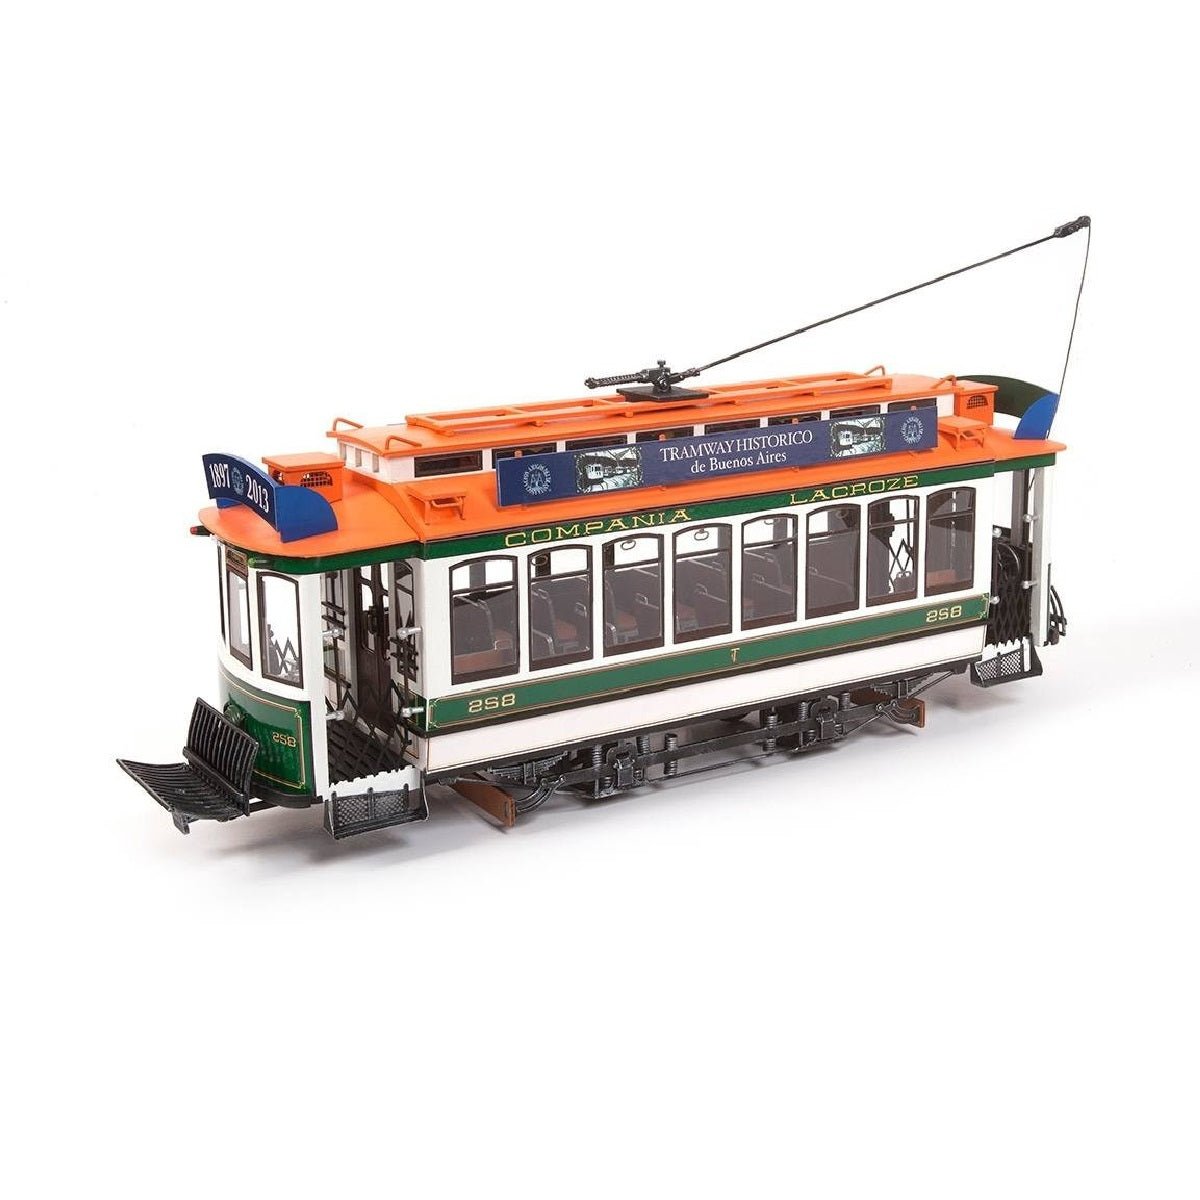 OcCre® Lacroze "Buenos Aires" Tram Model Kit, 1/24 Scale - Micro - Mark Scale Model Kits